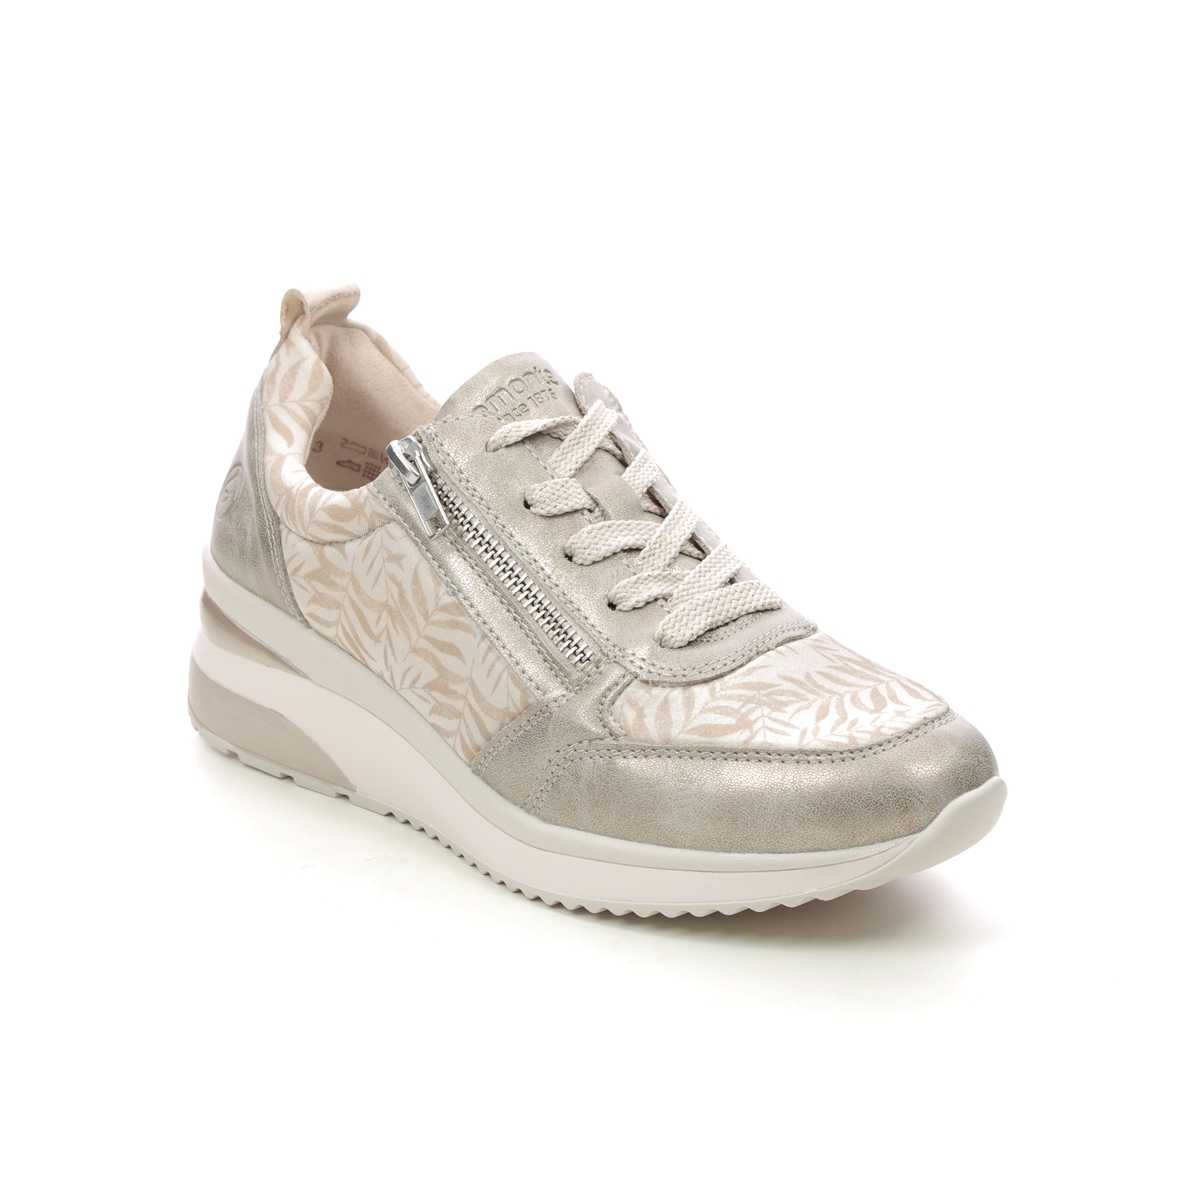 Remonte Rea Zip Wedge Light Gold Womens Trainers D2401-60 In Size 38 In Plain Light Gold